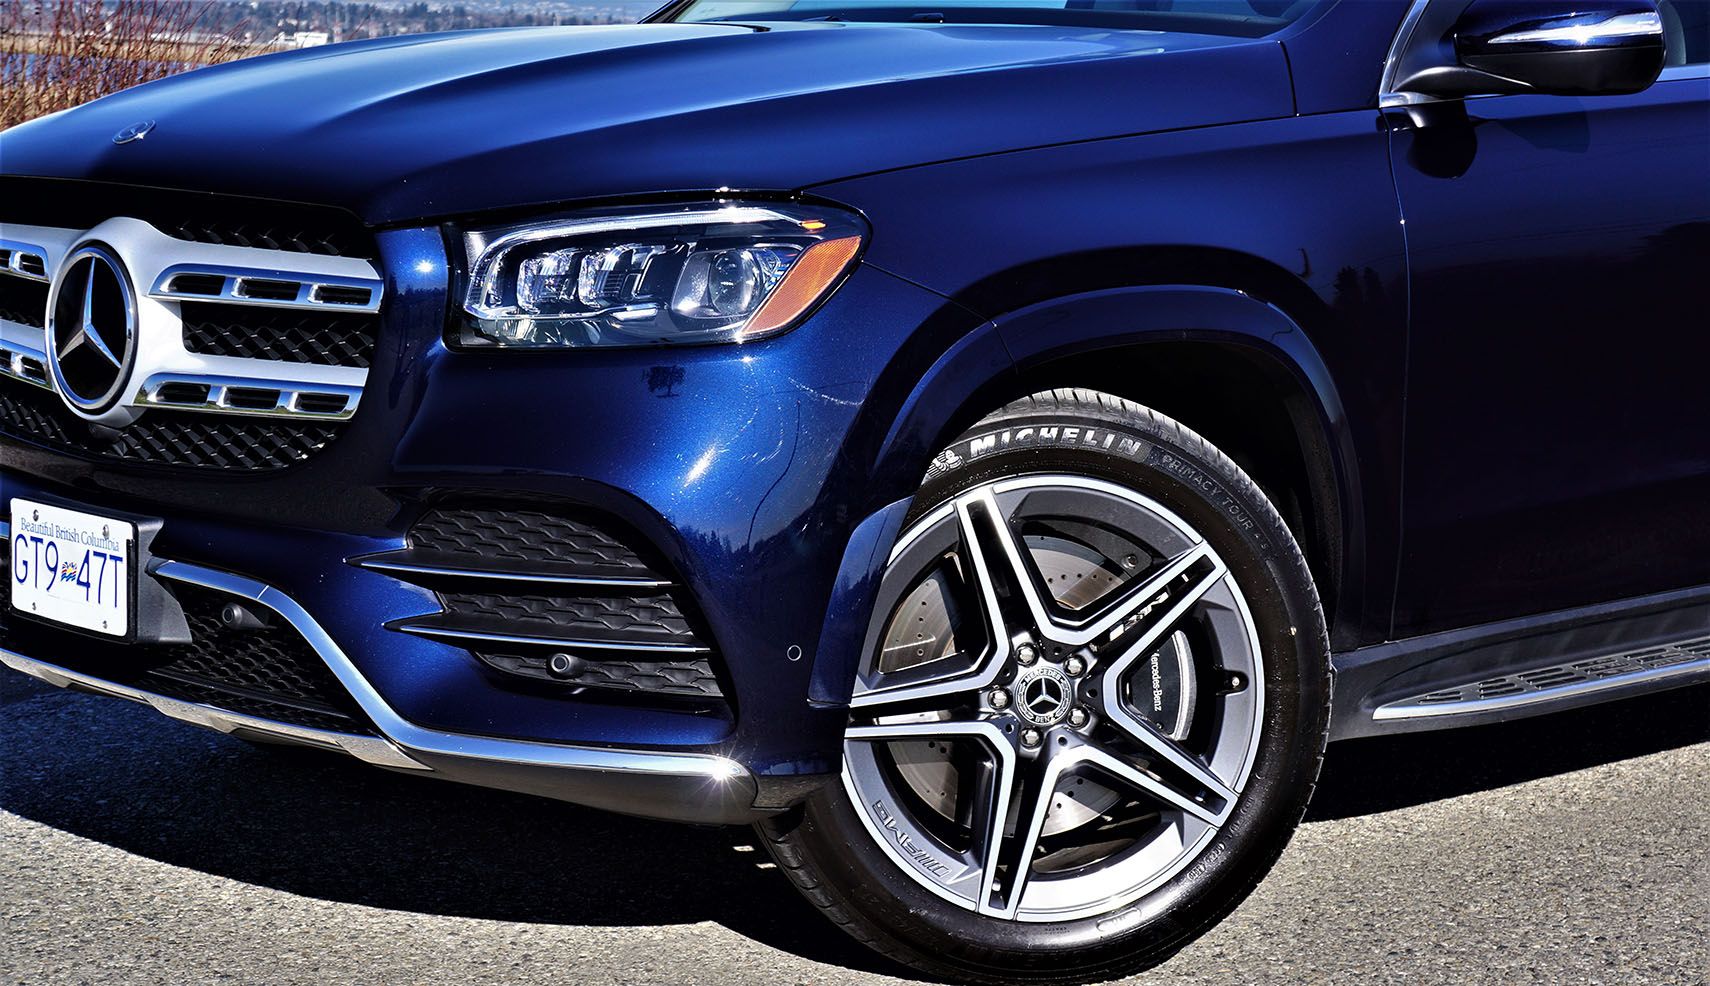 From the new grille, LED headlamps and lower front fascia design to a much more rounded profile, the current GLS appears much more aerodynamic.